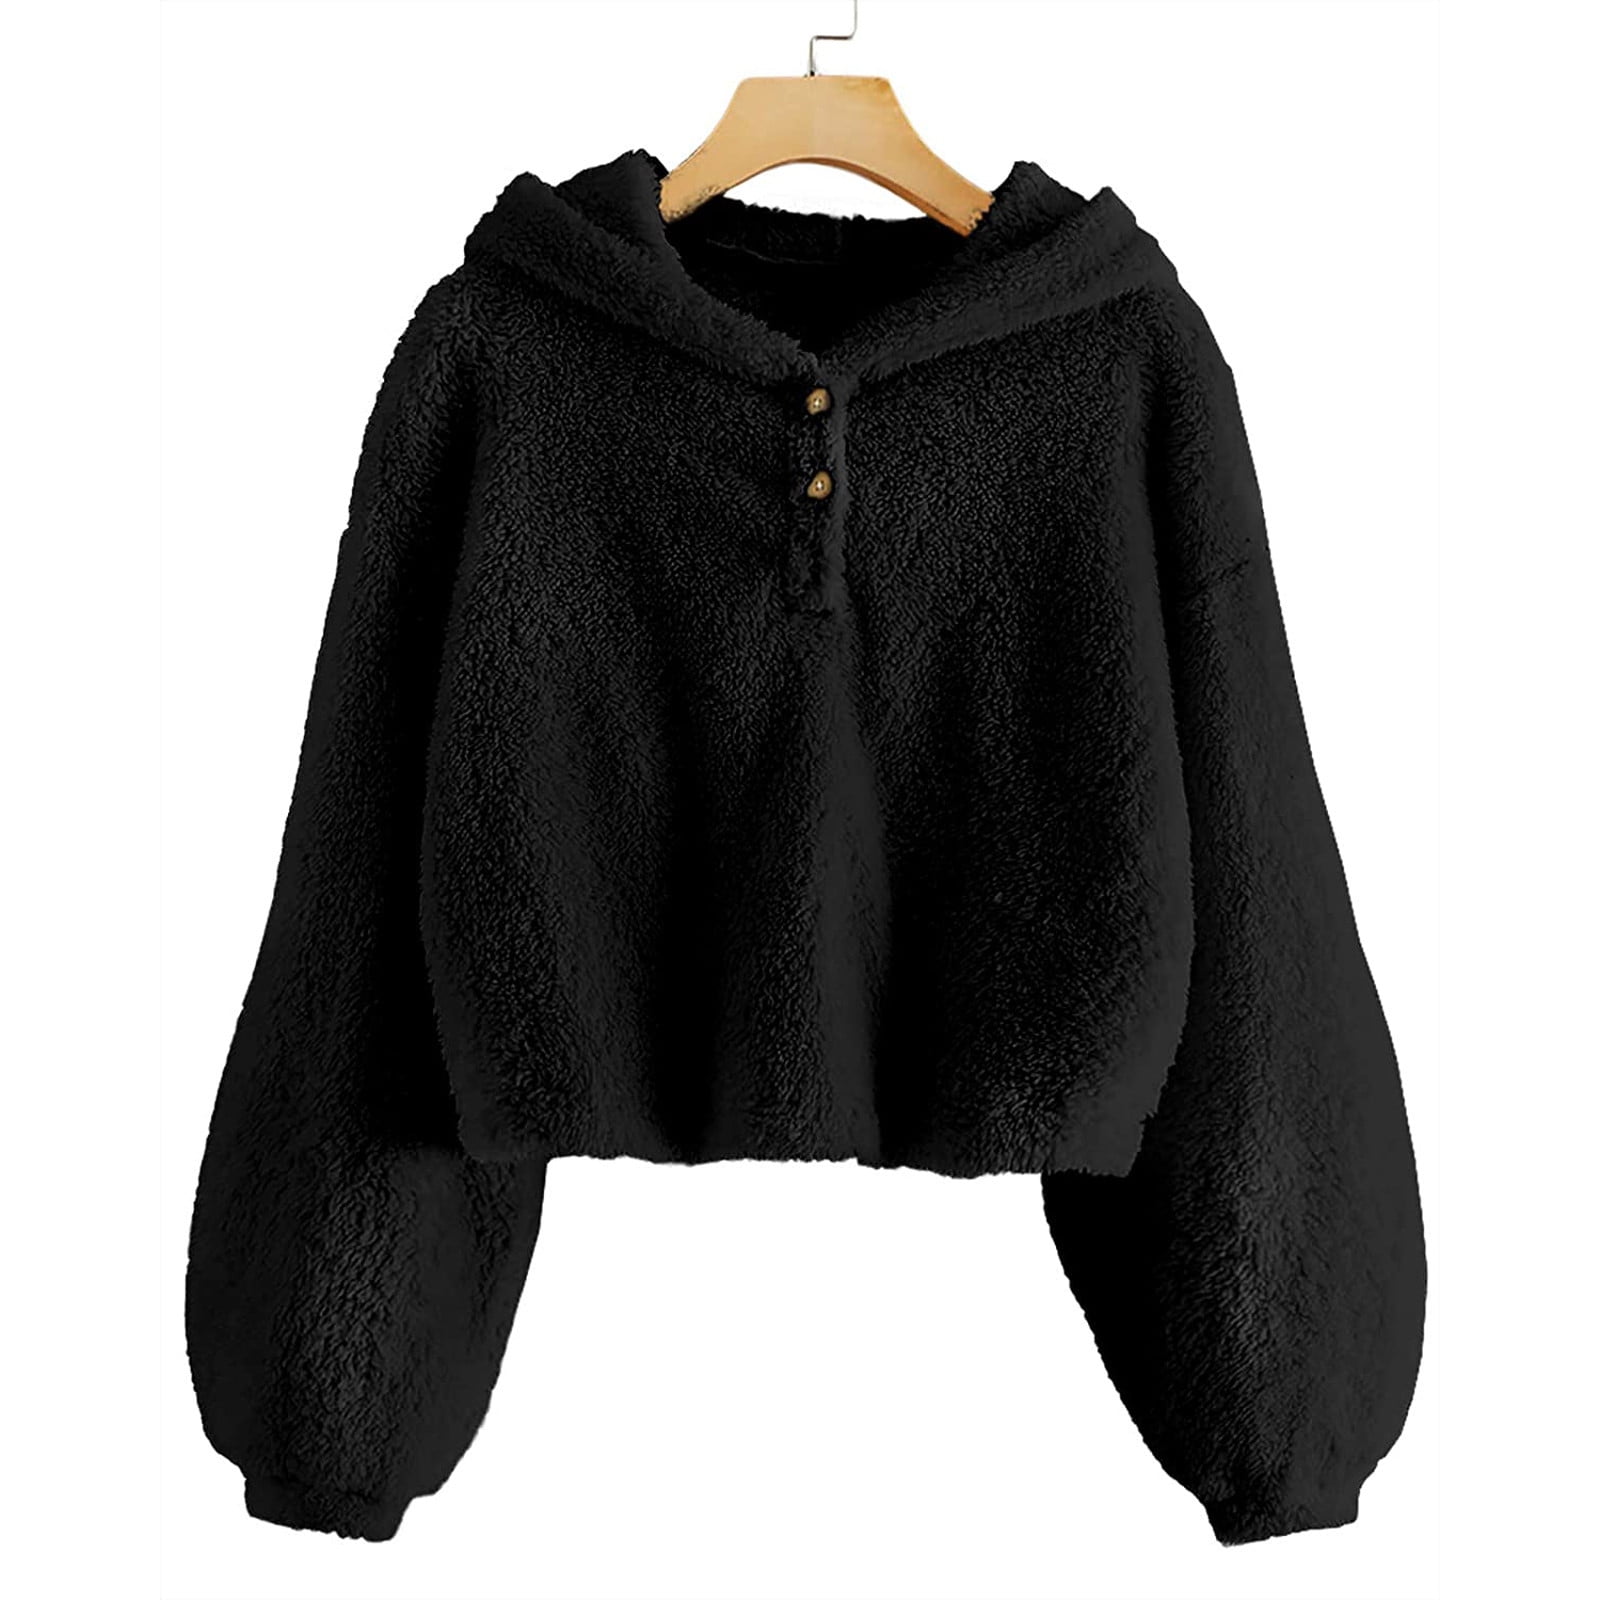  Haloumoning Girls Fuzzy Fleece Pullover Hoodies Sweatshirt  Casual Loose Outwear Coat with Pockets 6-7 Years: Clothing, Shoes & Jewelry